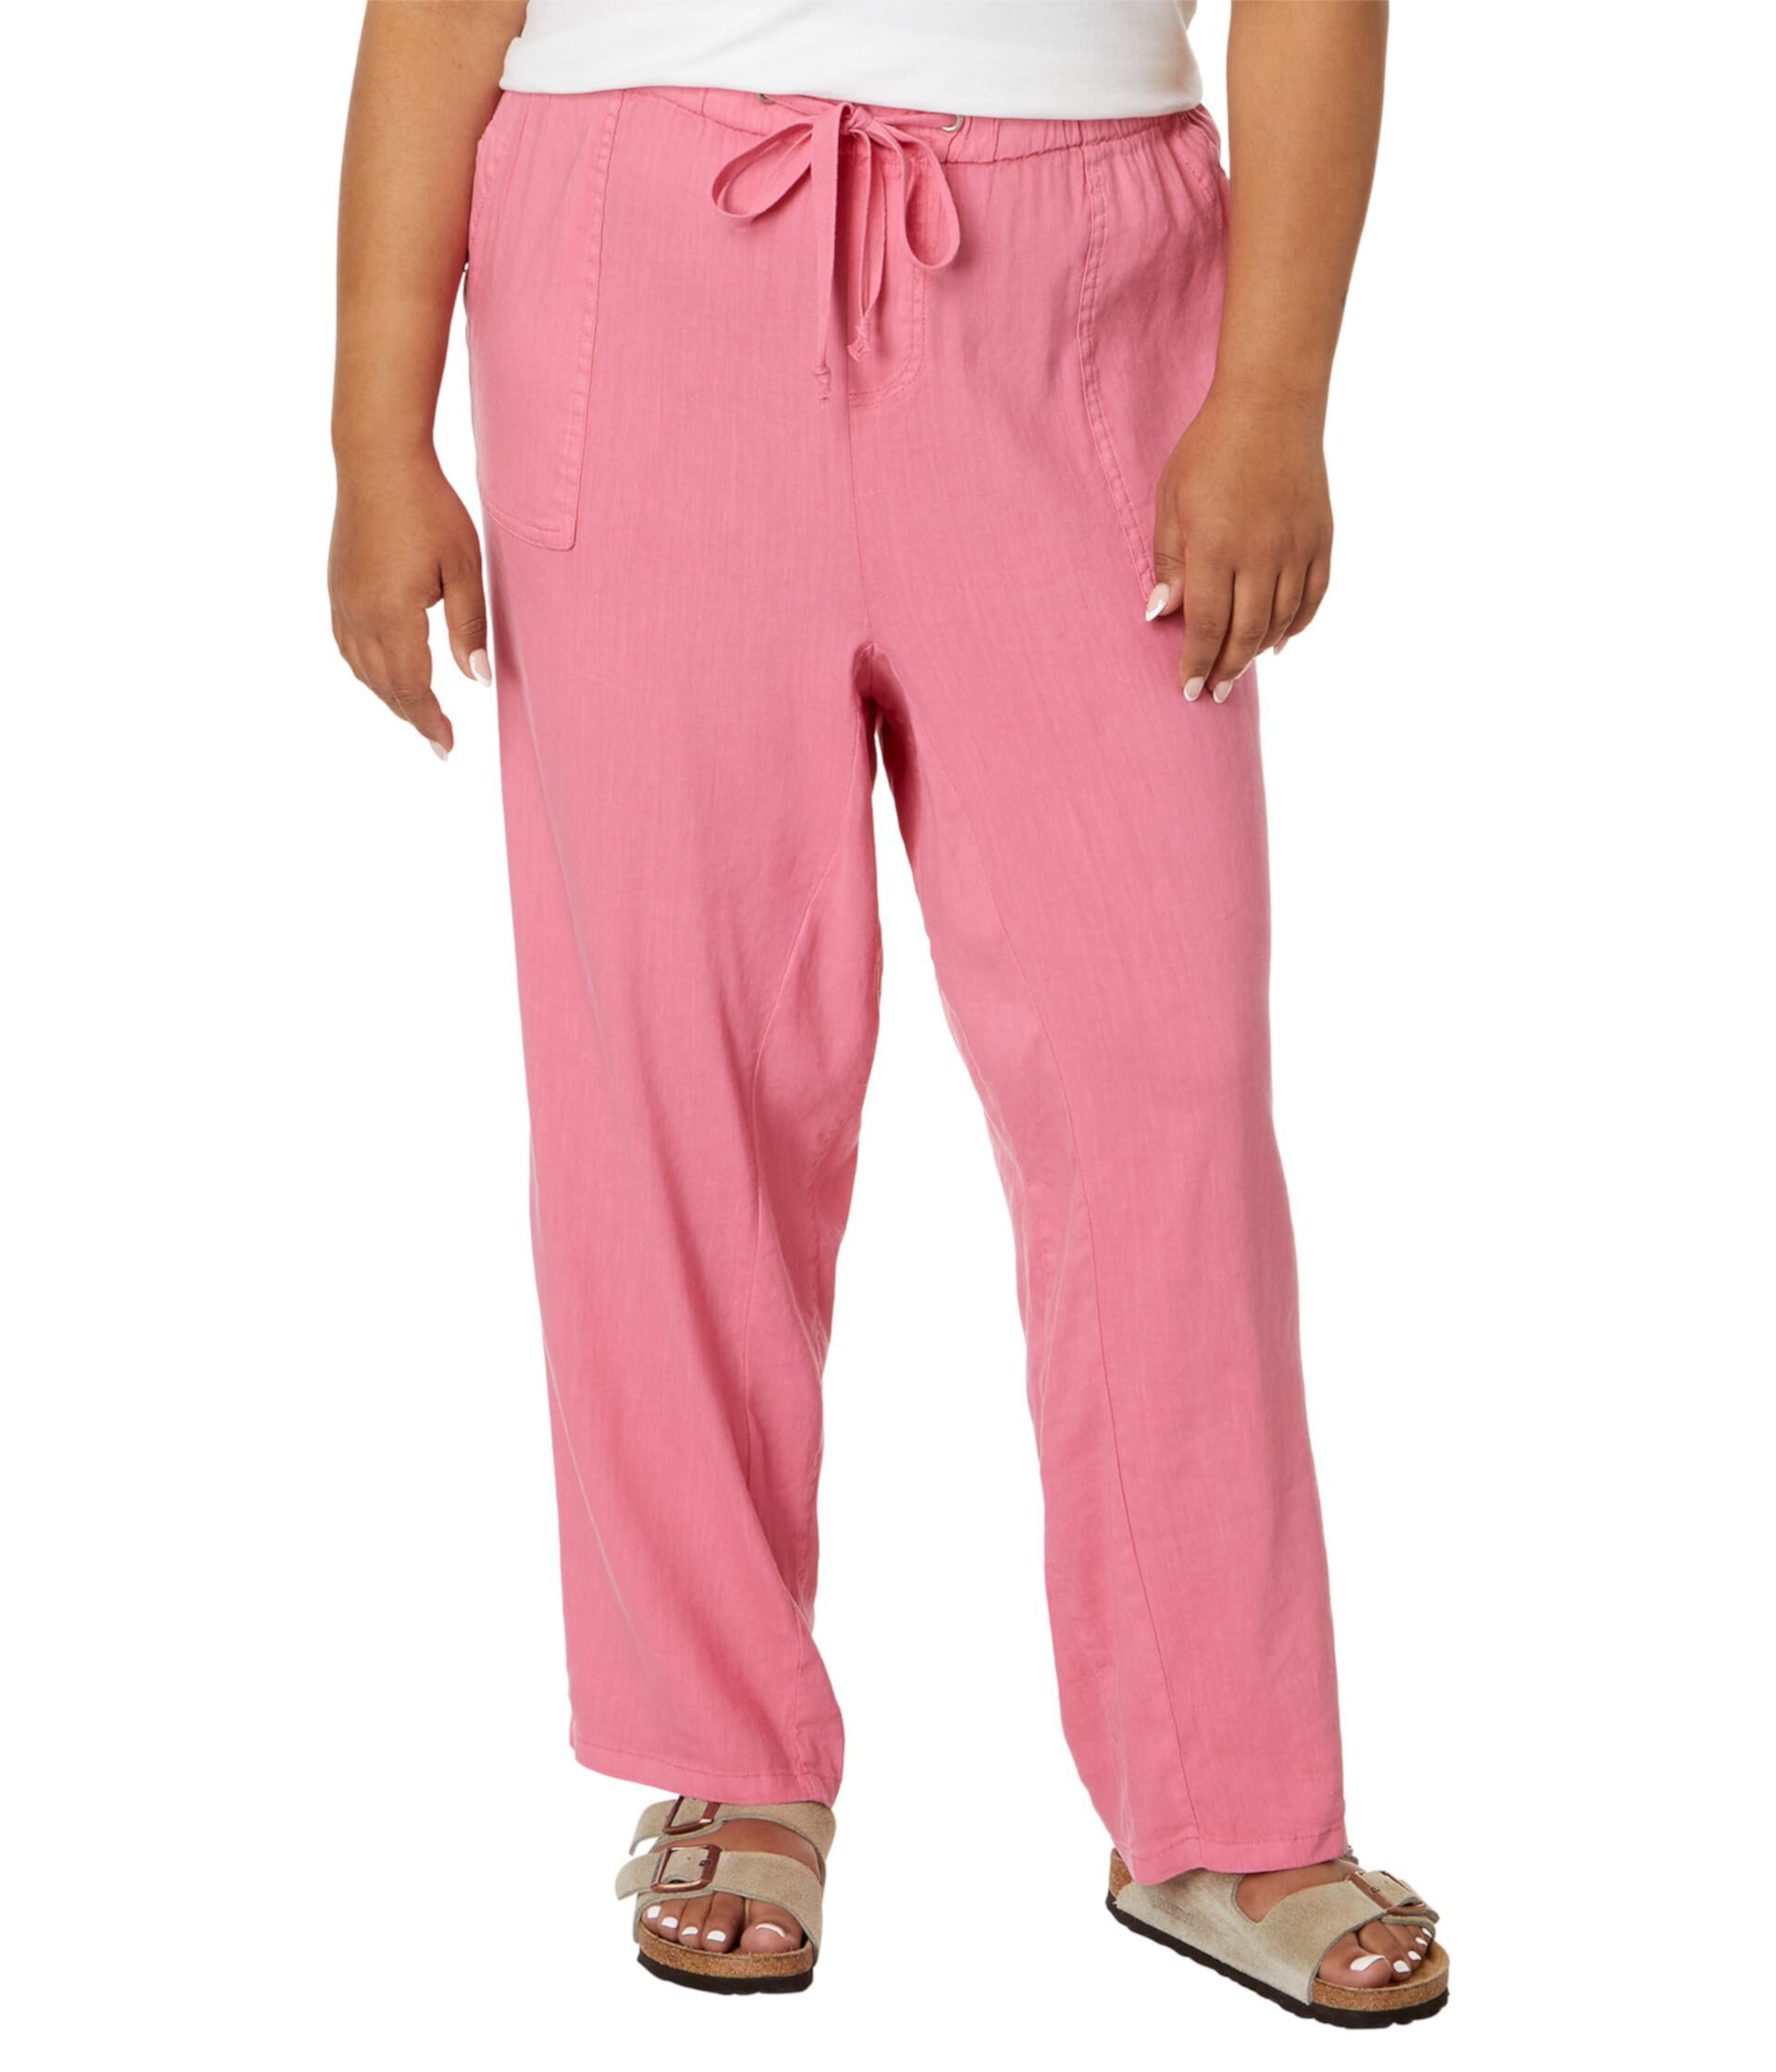 Plus Size Rosalie - Drawstring Pants with Porkchop Pockets in Dawn Pink KUT from the Kloth